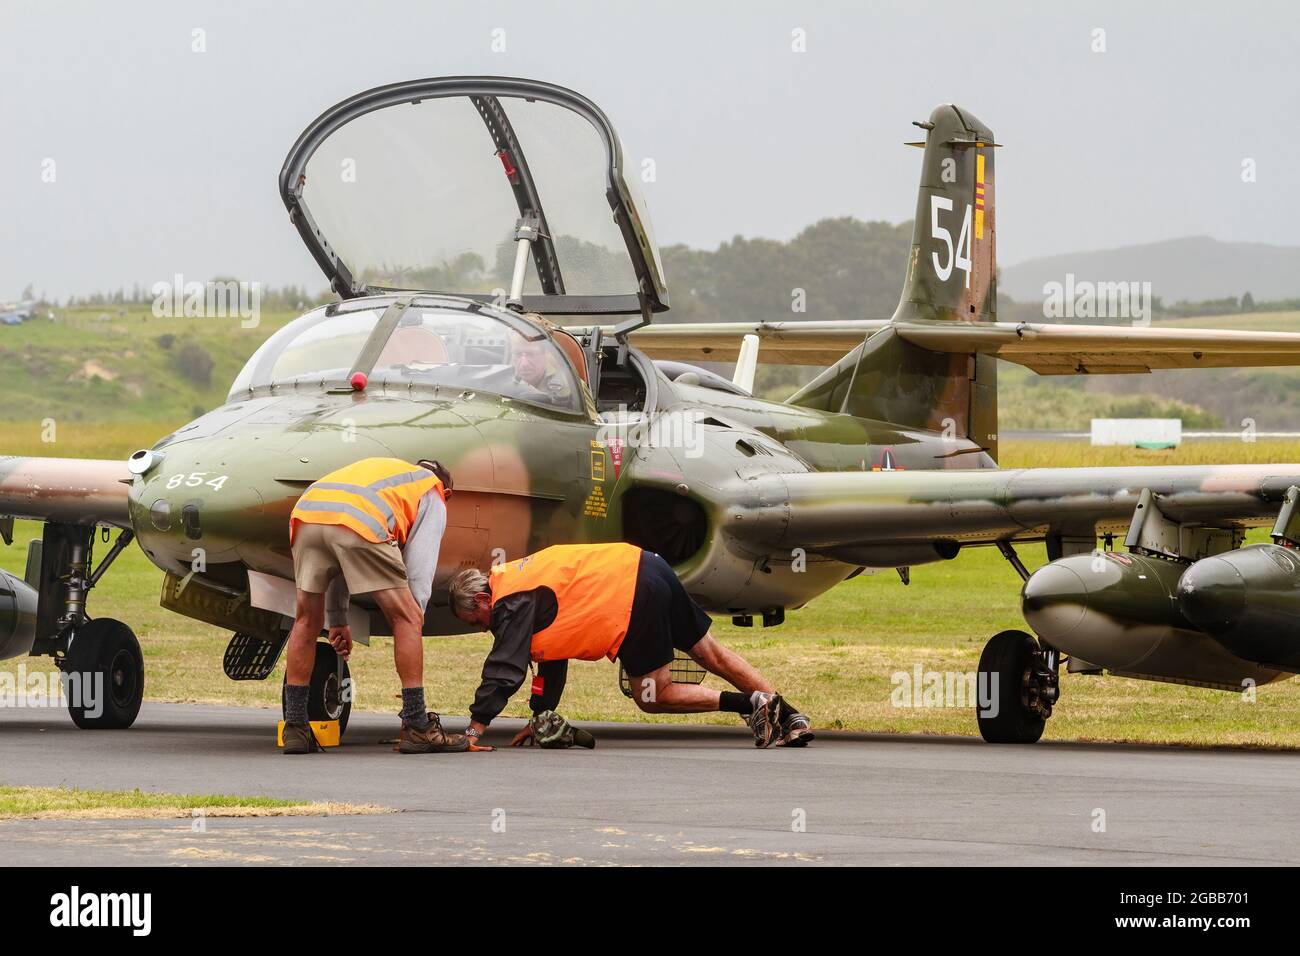 A BAS Strikemaster Mk 88, a British attack aircraft, being examined by ground crew. Photographed at an airshow in New Zealand Stock Photo